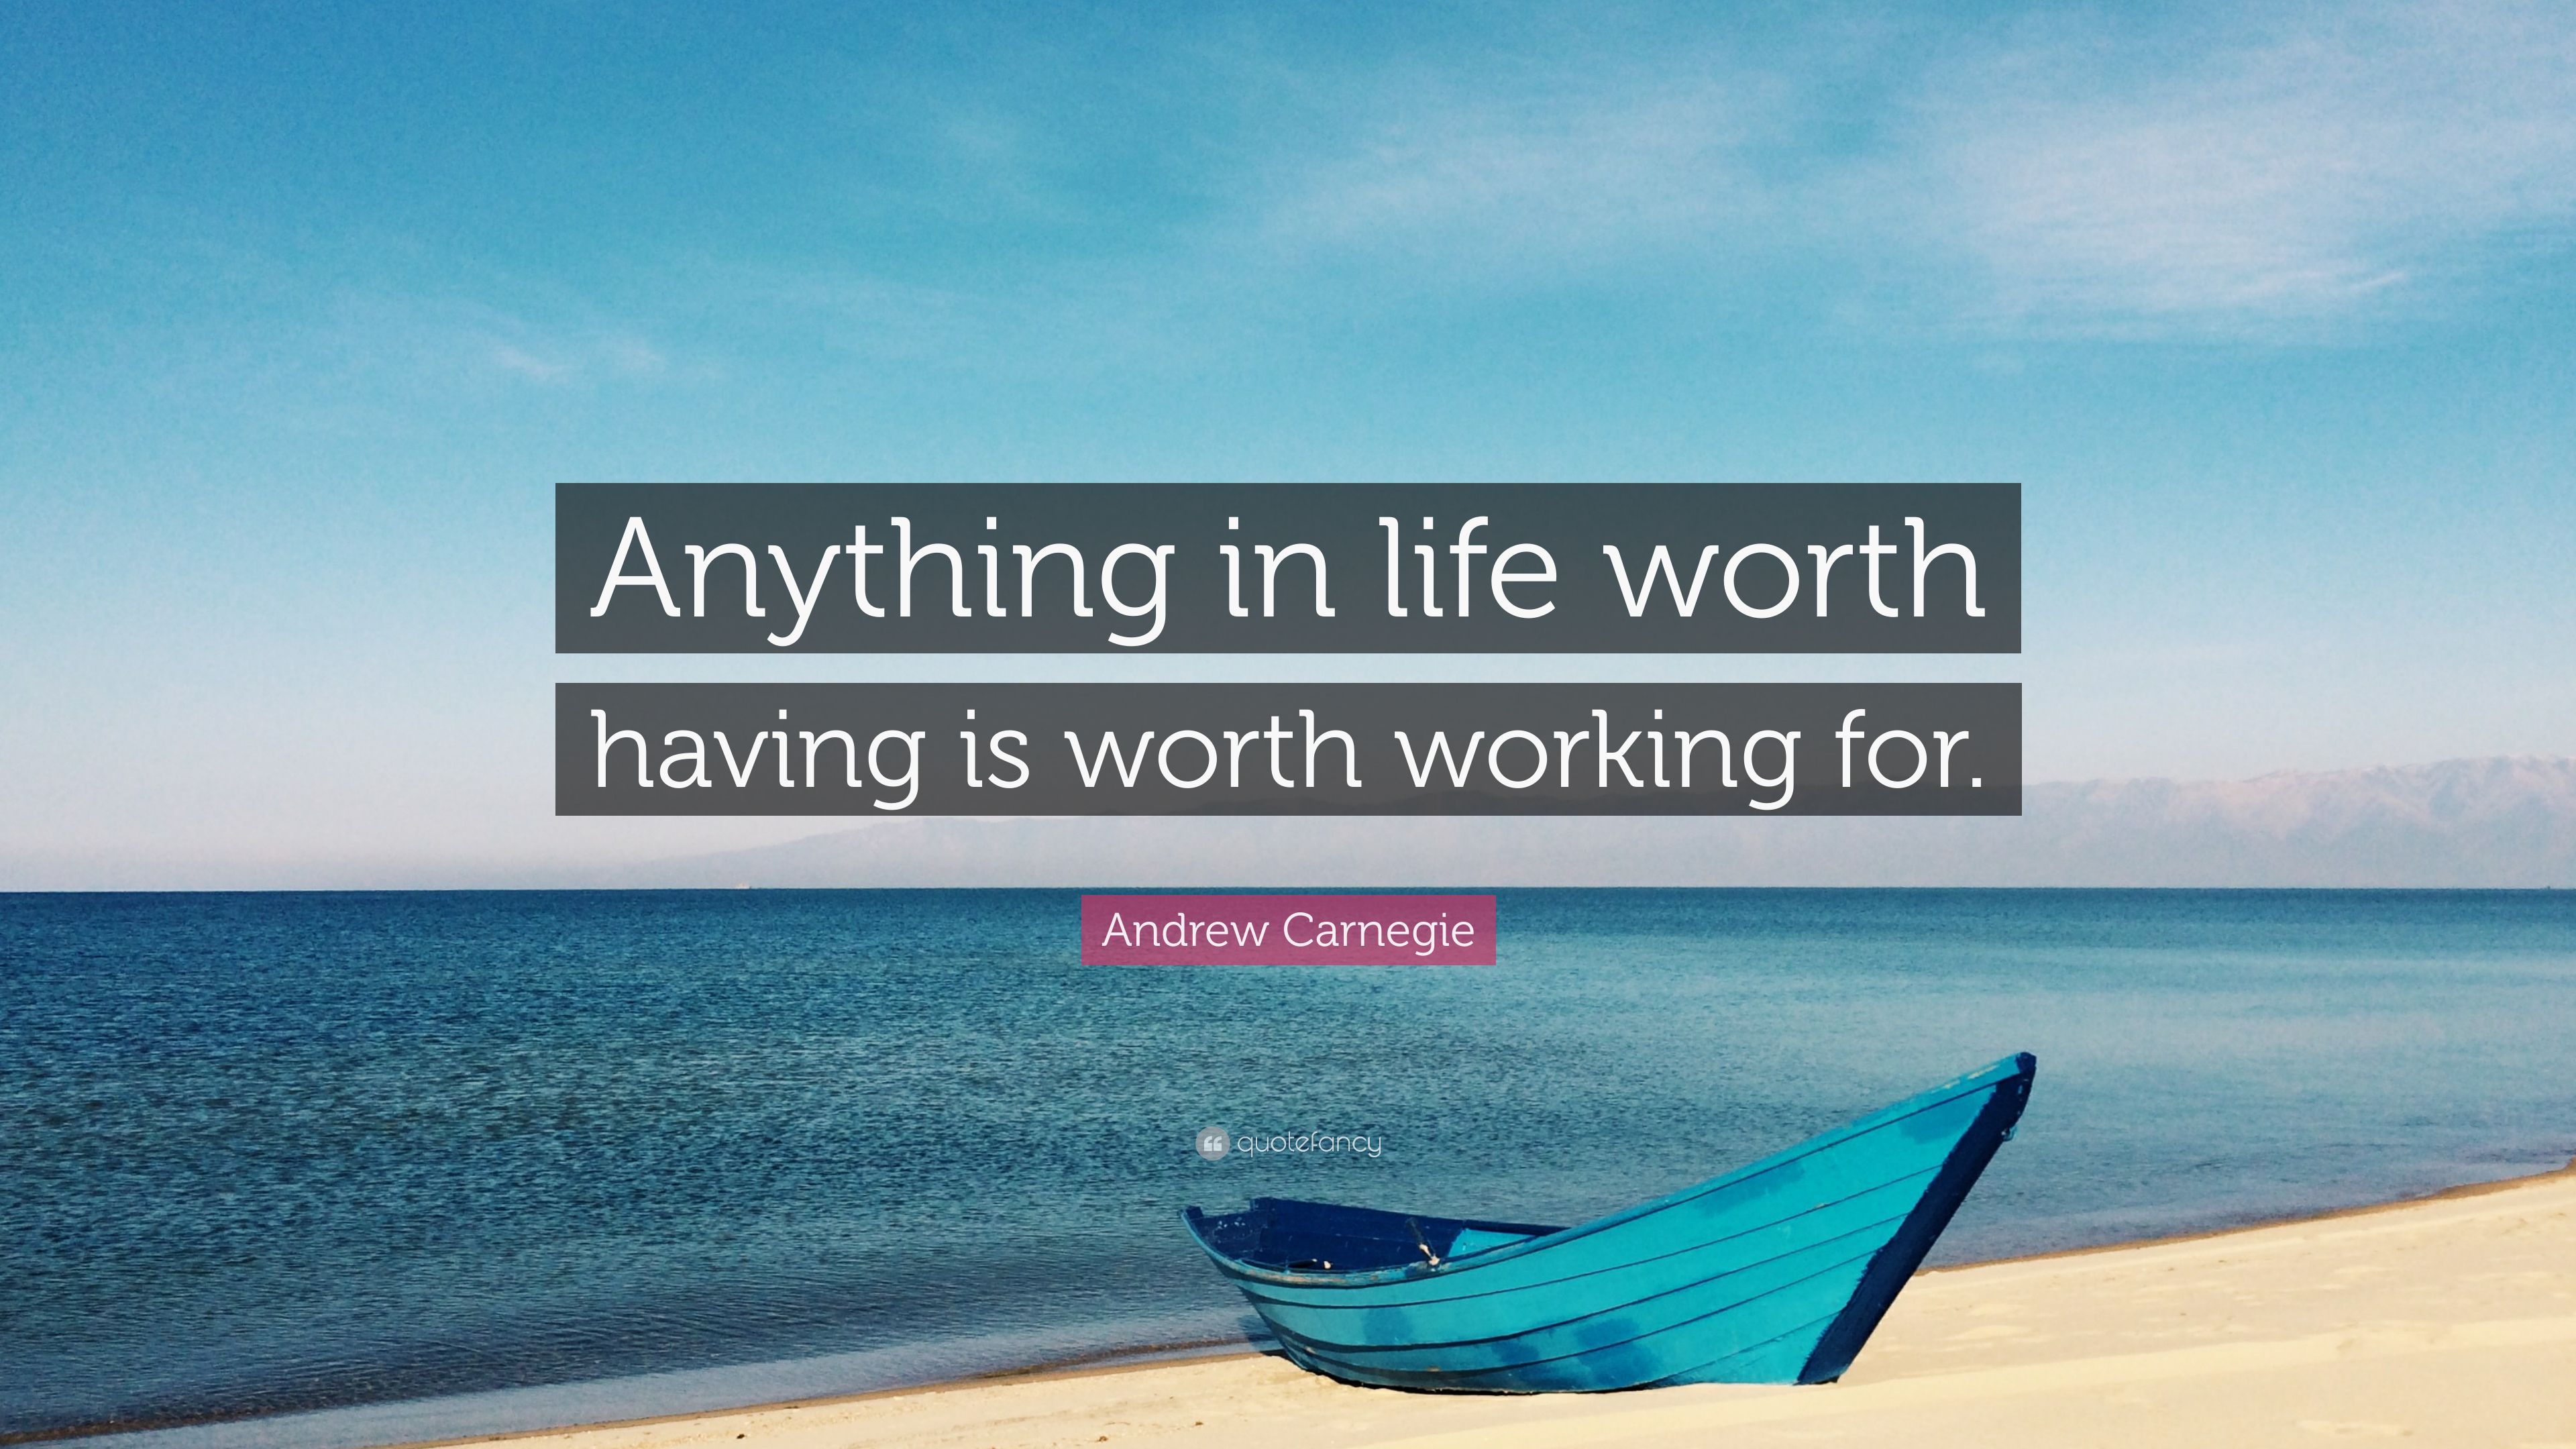 Andrew Carnegie Quote: “Anything in life worth having is worth